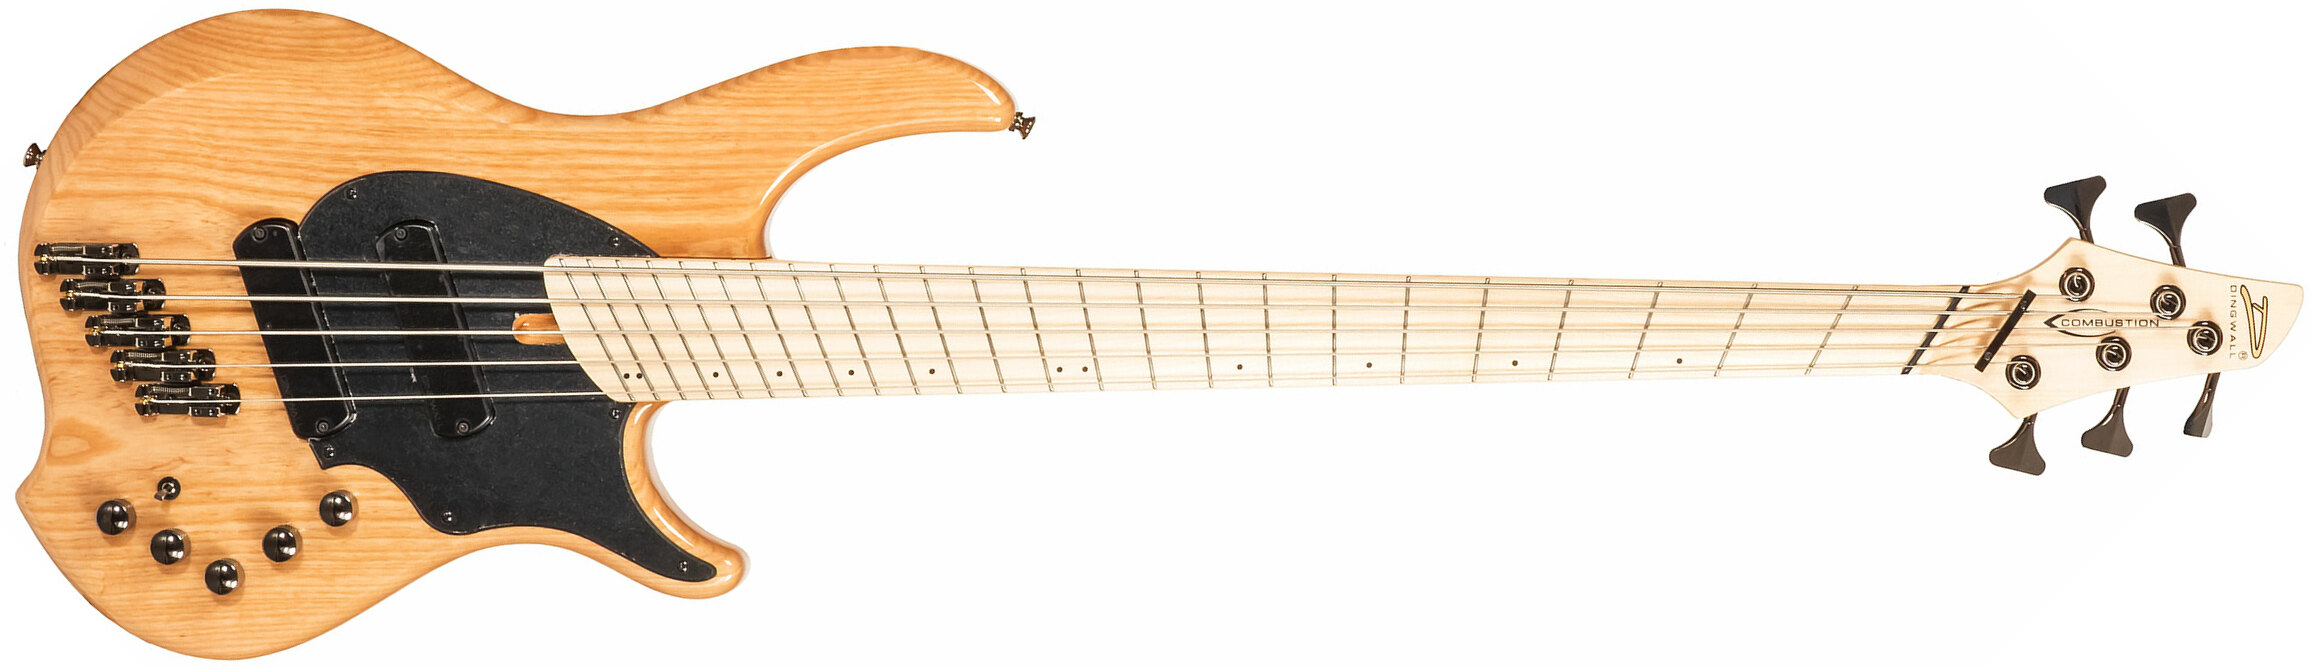 Dingwall Combustion Cb2 5c 2pu Active Mn - Natural - Solid body electric bass - Main picture